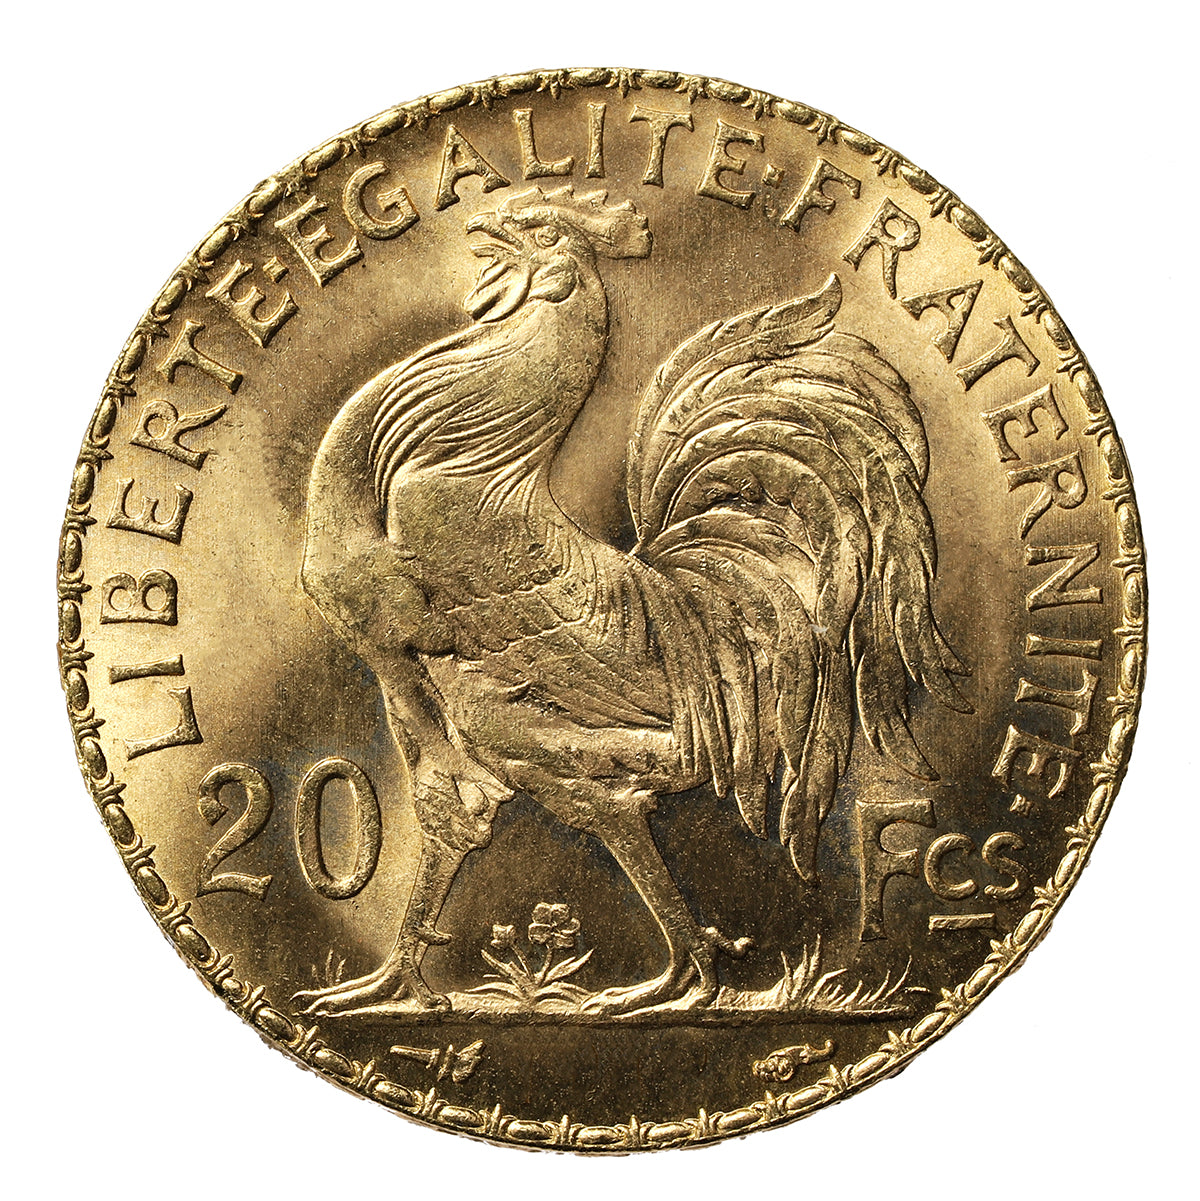 France Gold 20 Francs French Rooster Coin XF - AU